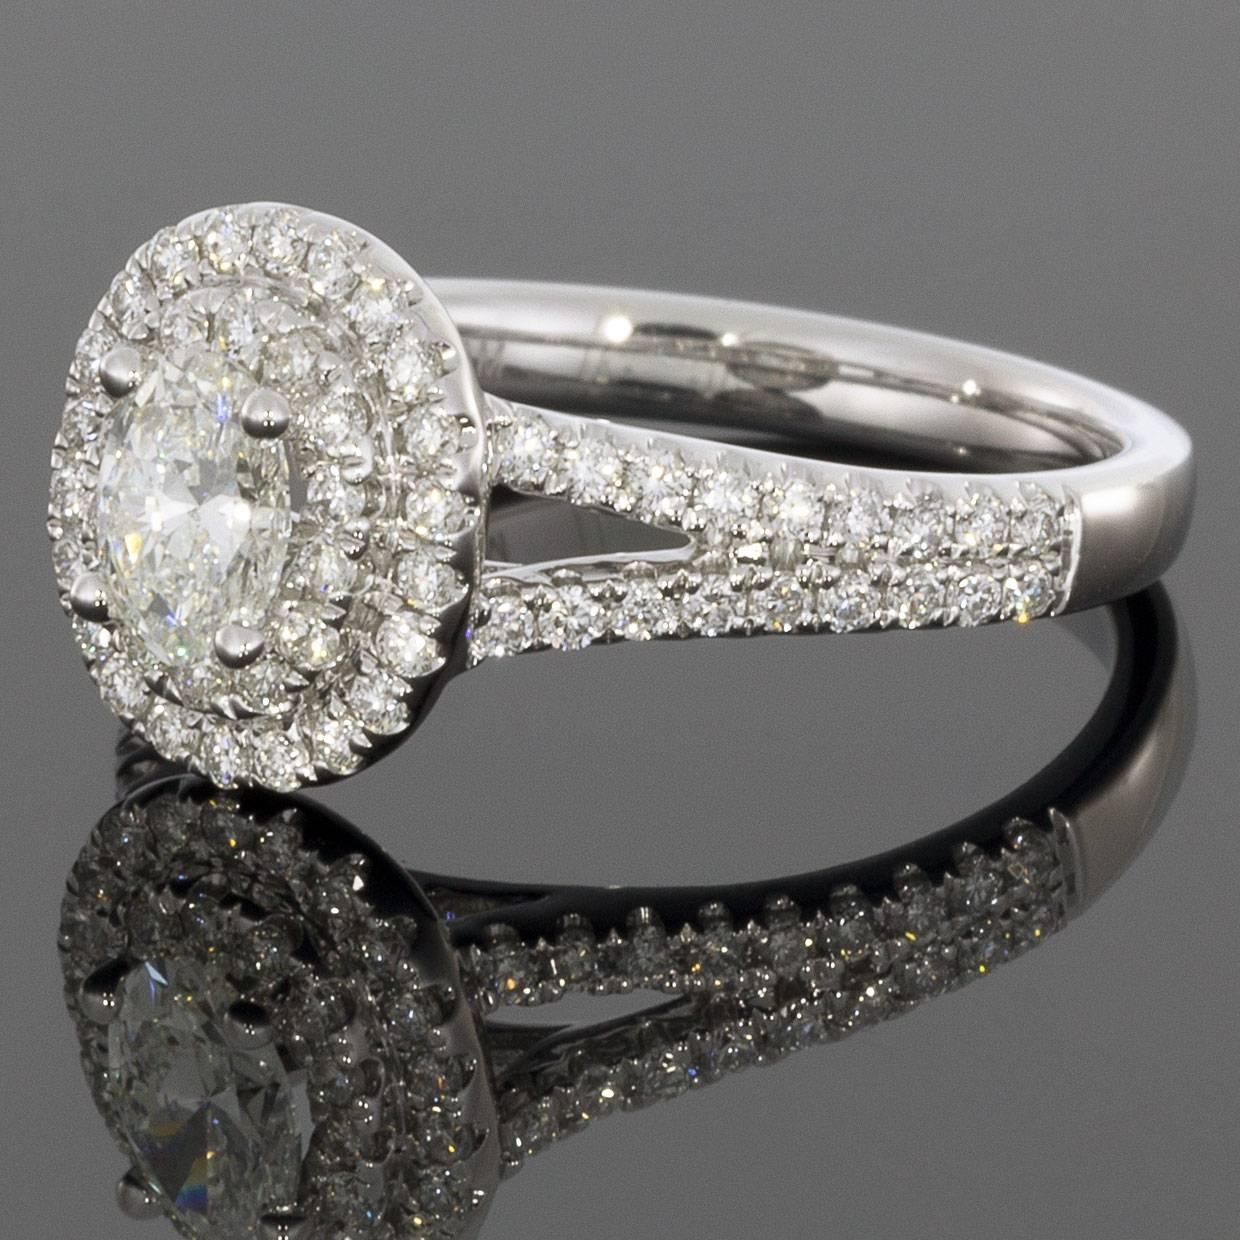 The double halo surrounding this oval diamond makes this diamond engagement ring stand out. The center diamond is H/SI2 and weighs .38 carats. 

DETAILS:
1.22CTW Diamond Engagement Ring
.38CT oval H/SI2 center diamond
.84CTW white round accent